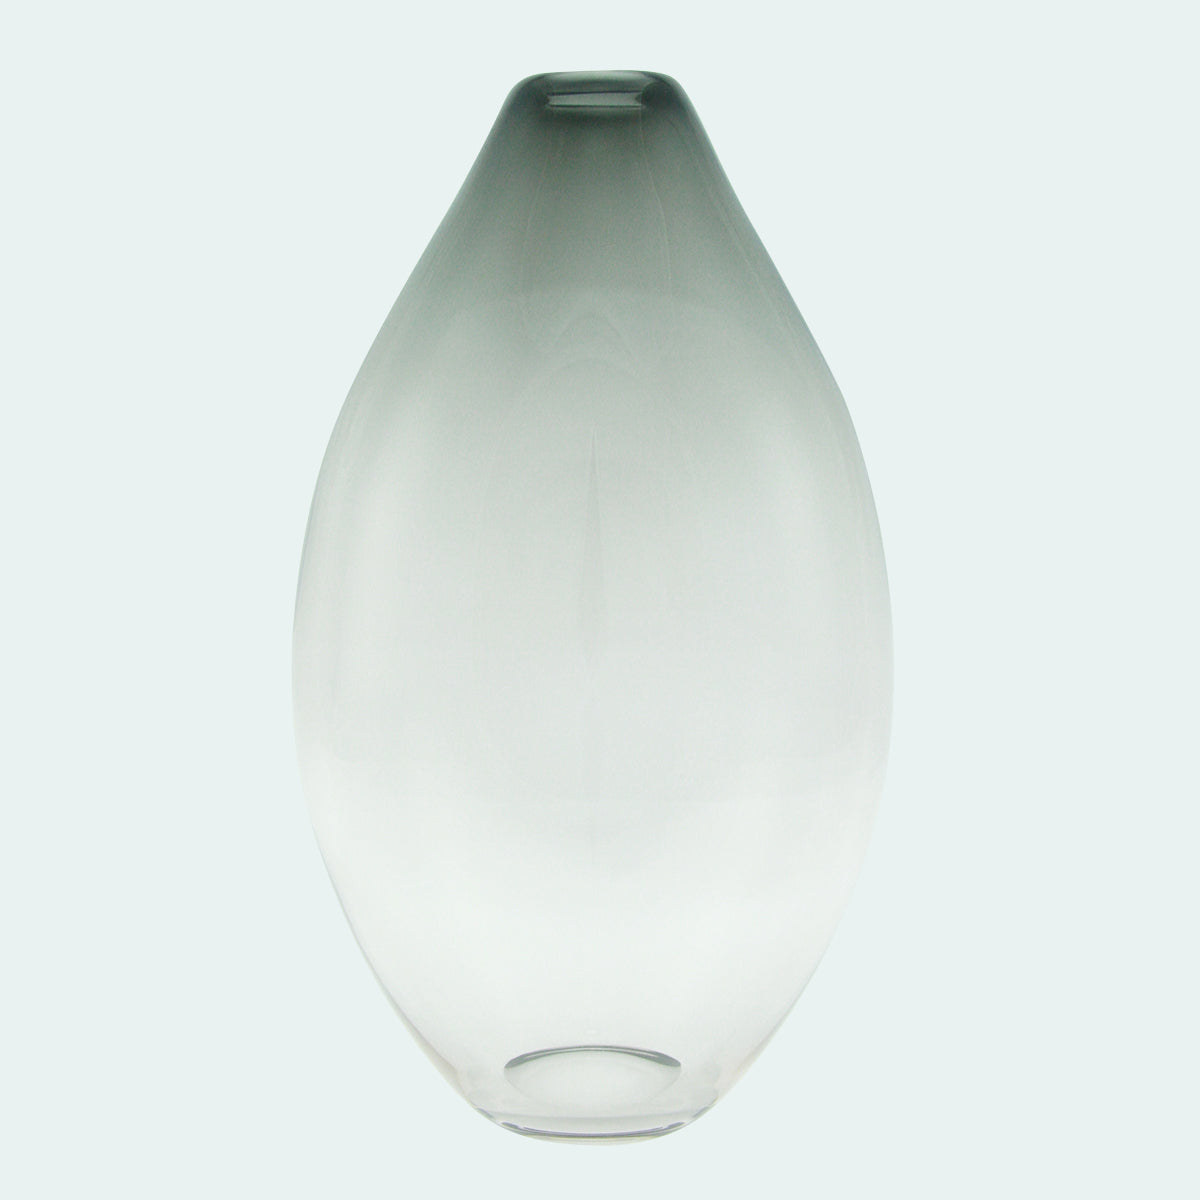 Muted Necked Oval Vessels